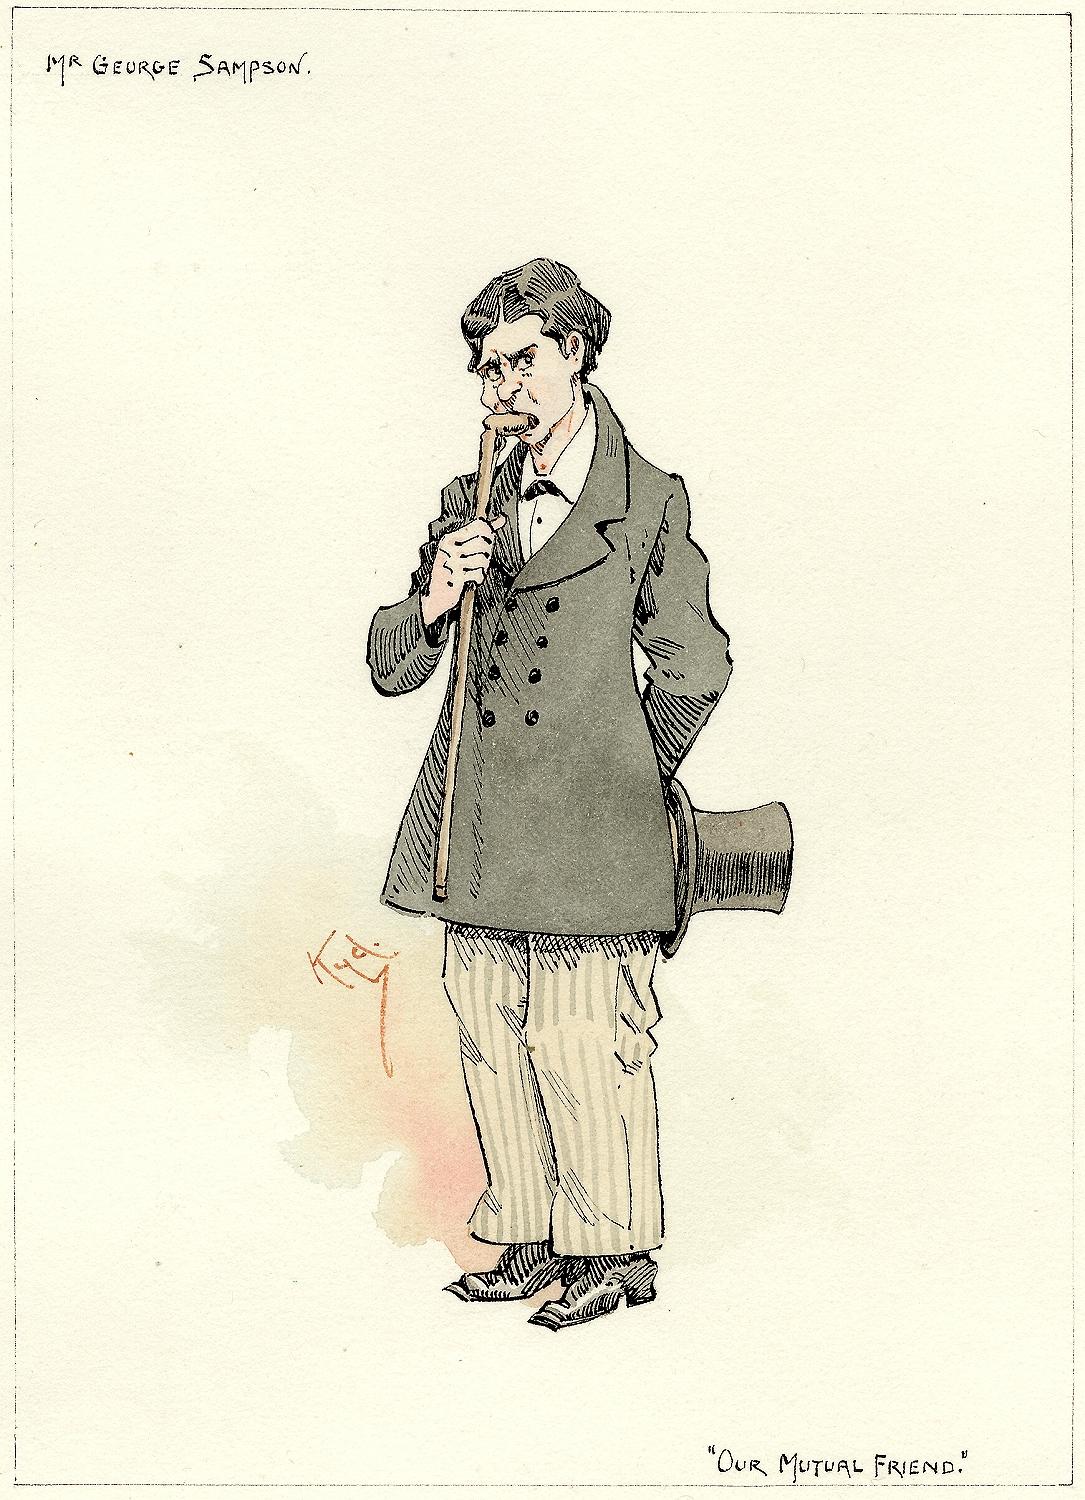 AUTHOR: CLARKE, Joseph Clayton (KYD) (Charles Dickens). 

TITLE: Mr. George Sampson (from Our Mutual Friend)

PUBLISHER: England, [c. 1920]

DESCRIPTION: ORIGINAL INK AND WATERCOLOR SKETCH. 1 leaf, on paper, image 5-15/16